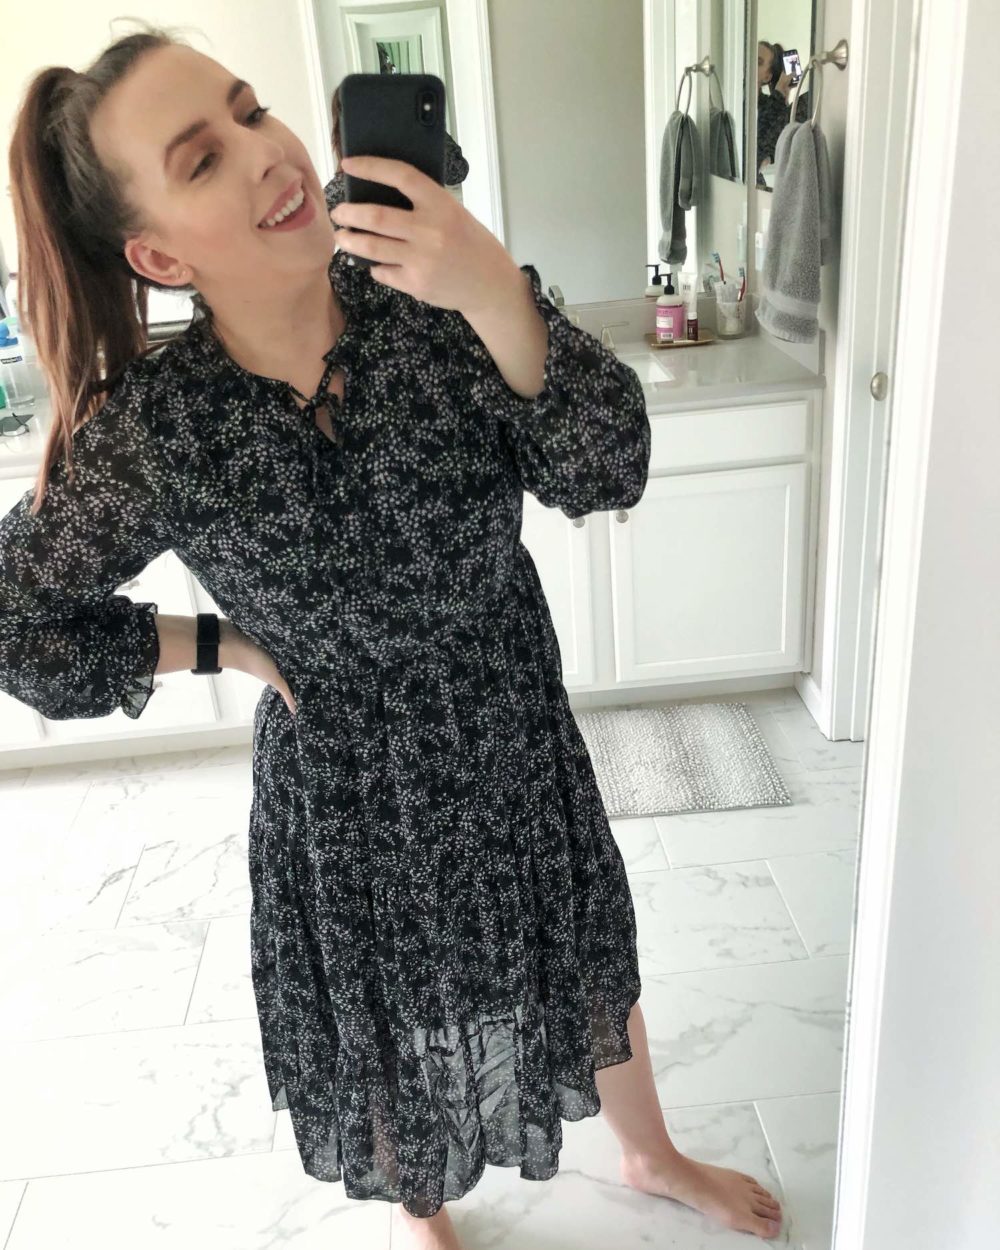 Cupshe Dress Try-On Haul - Floral High Neck Midi Dress